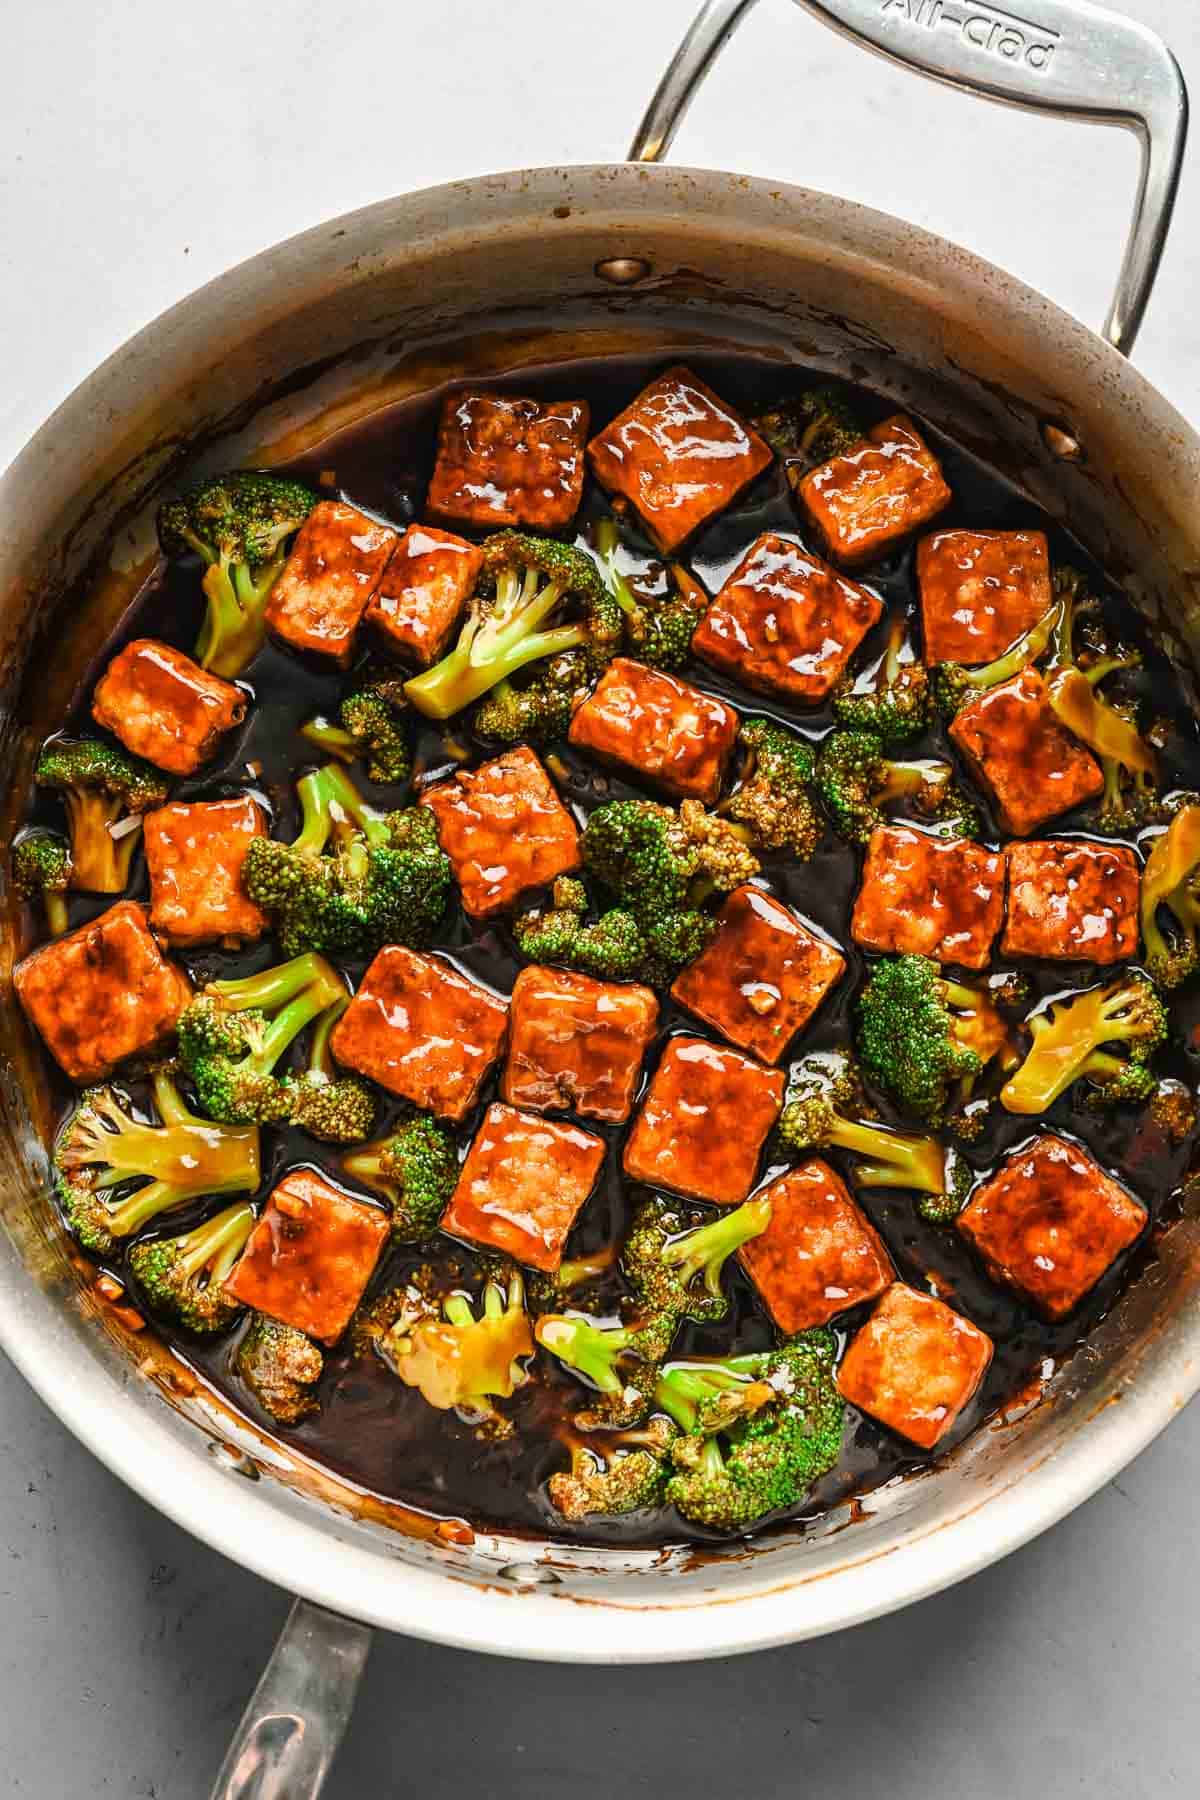 Cubed tofu, broccoli, and teriyaki sauce combined in a skillet.